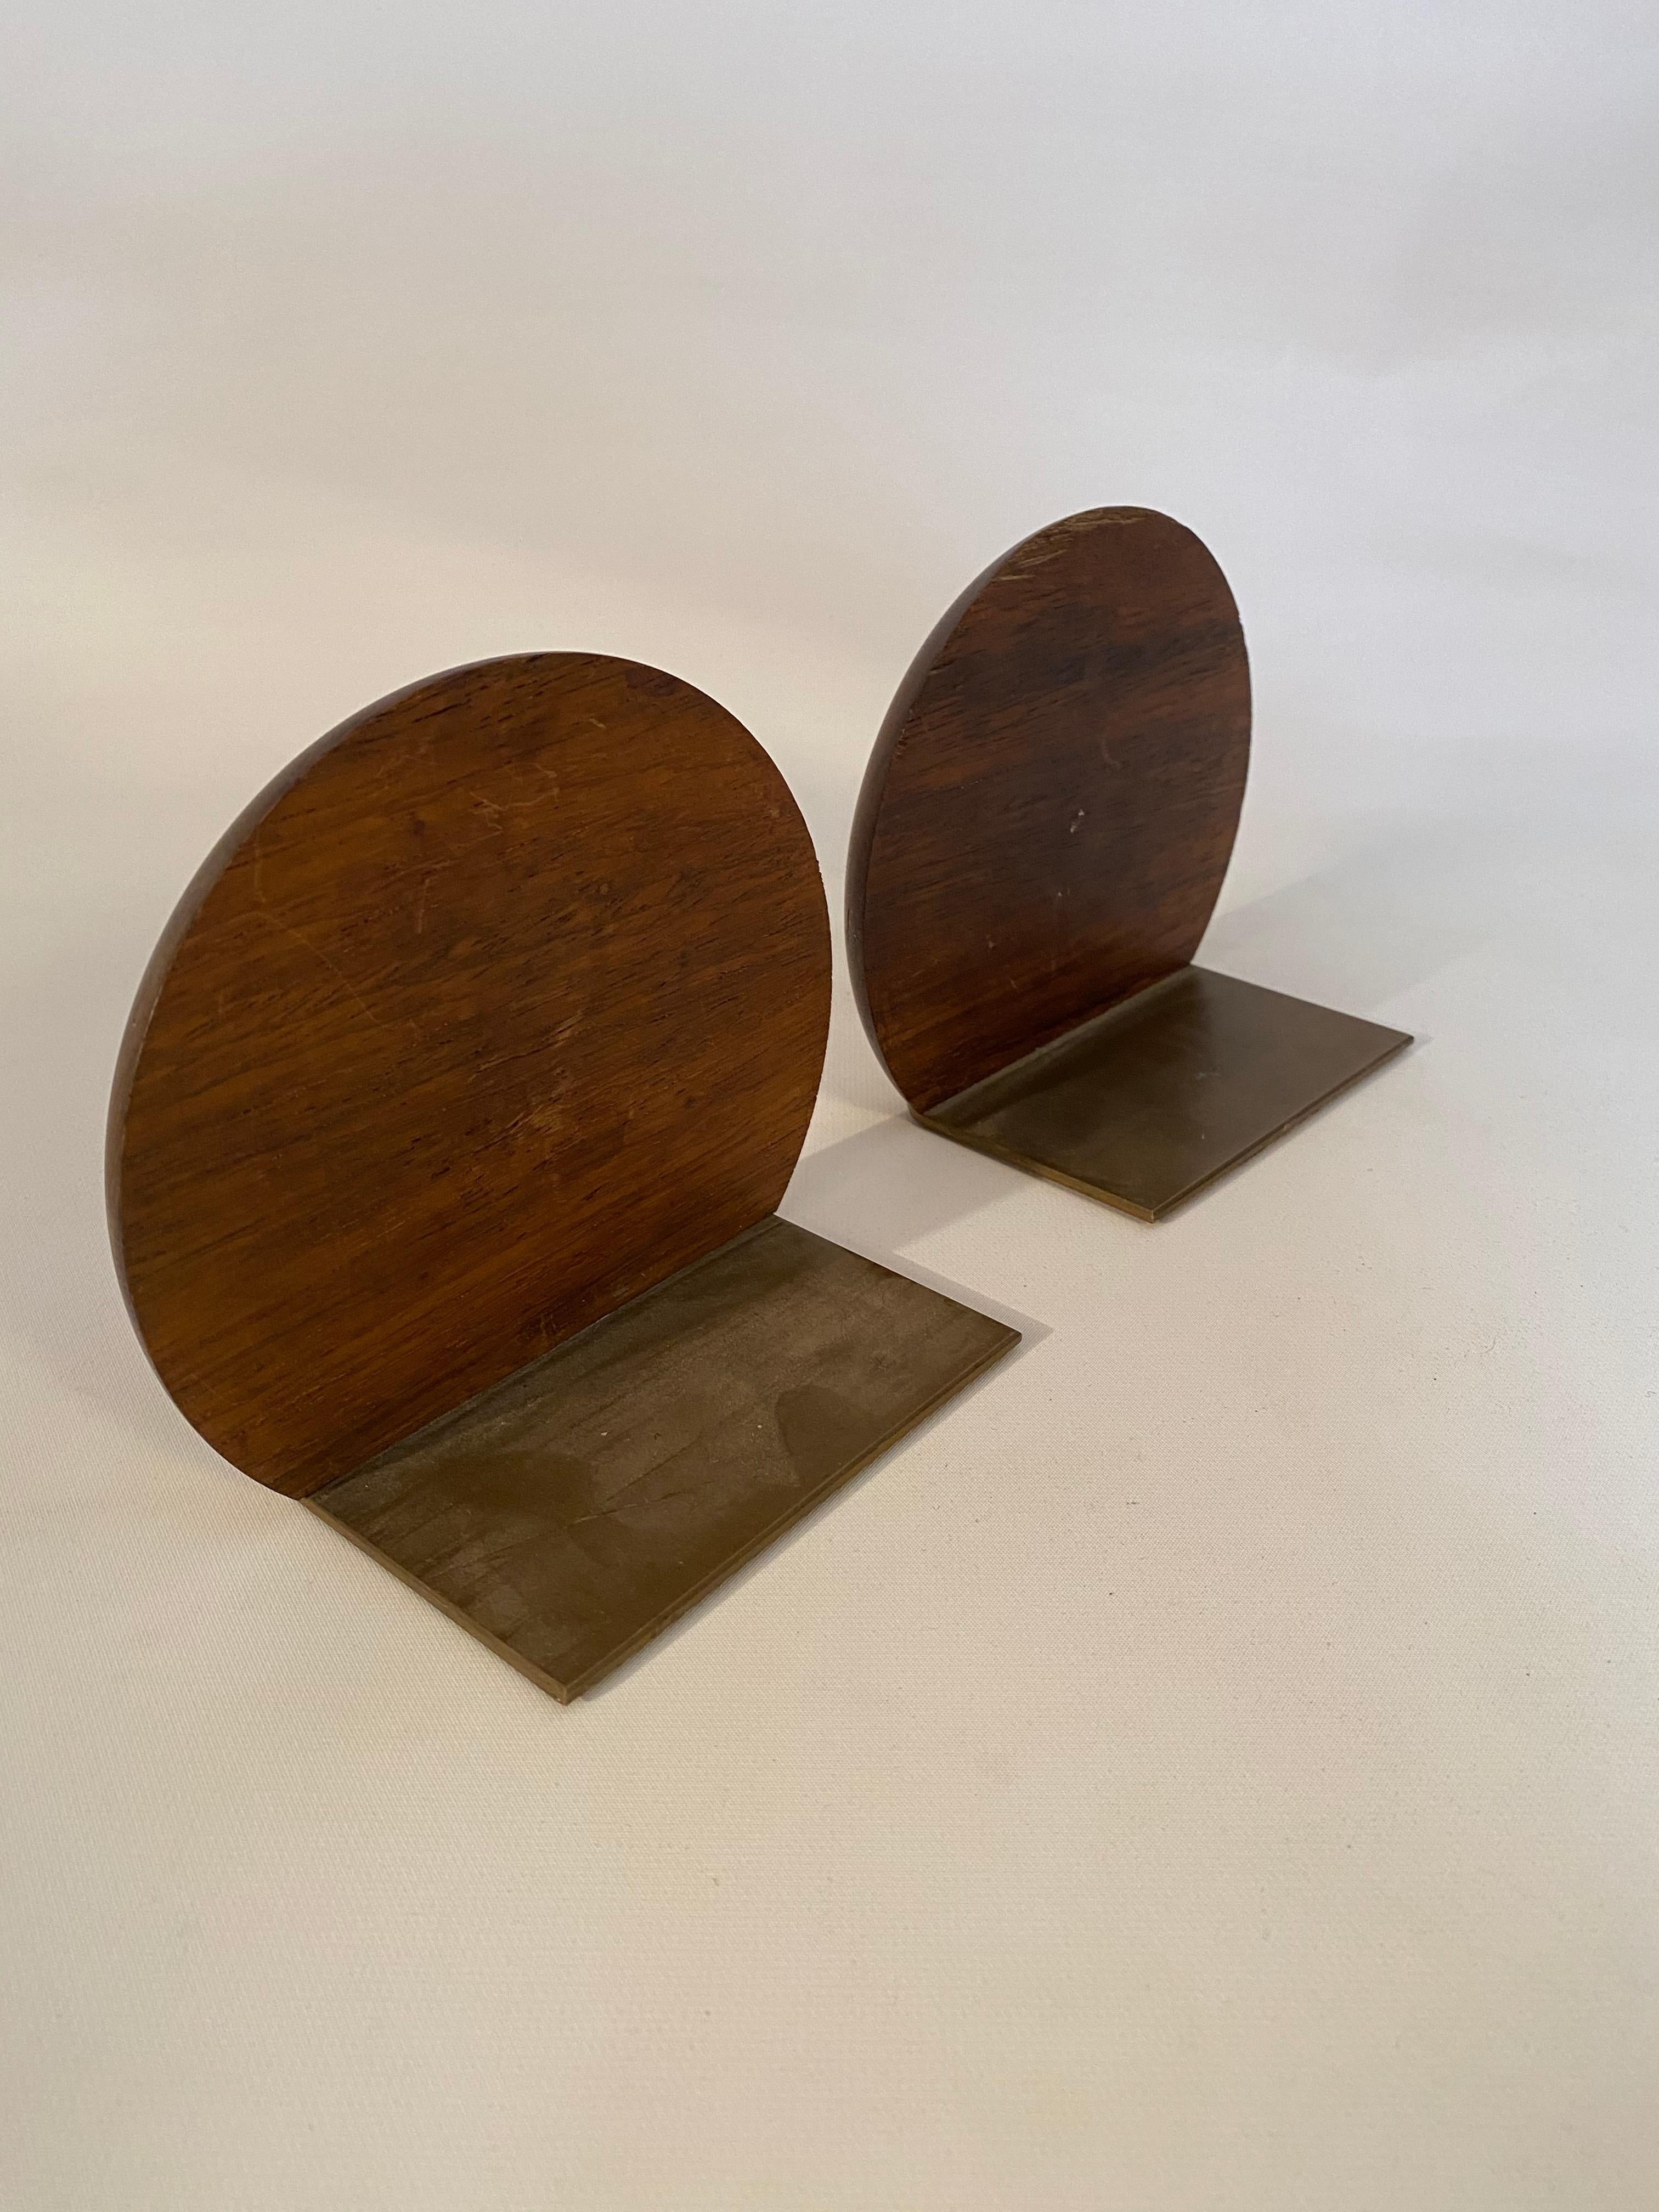 Mid-20th Century American Crafts Movement Wenge Wood Bookends